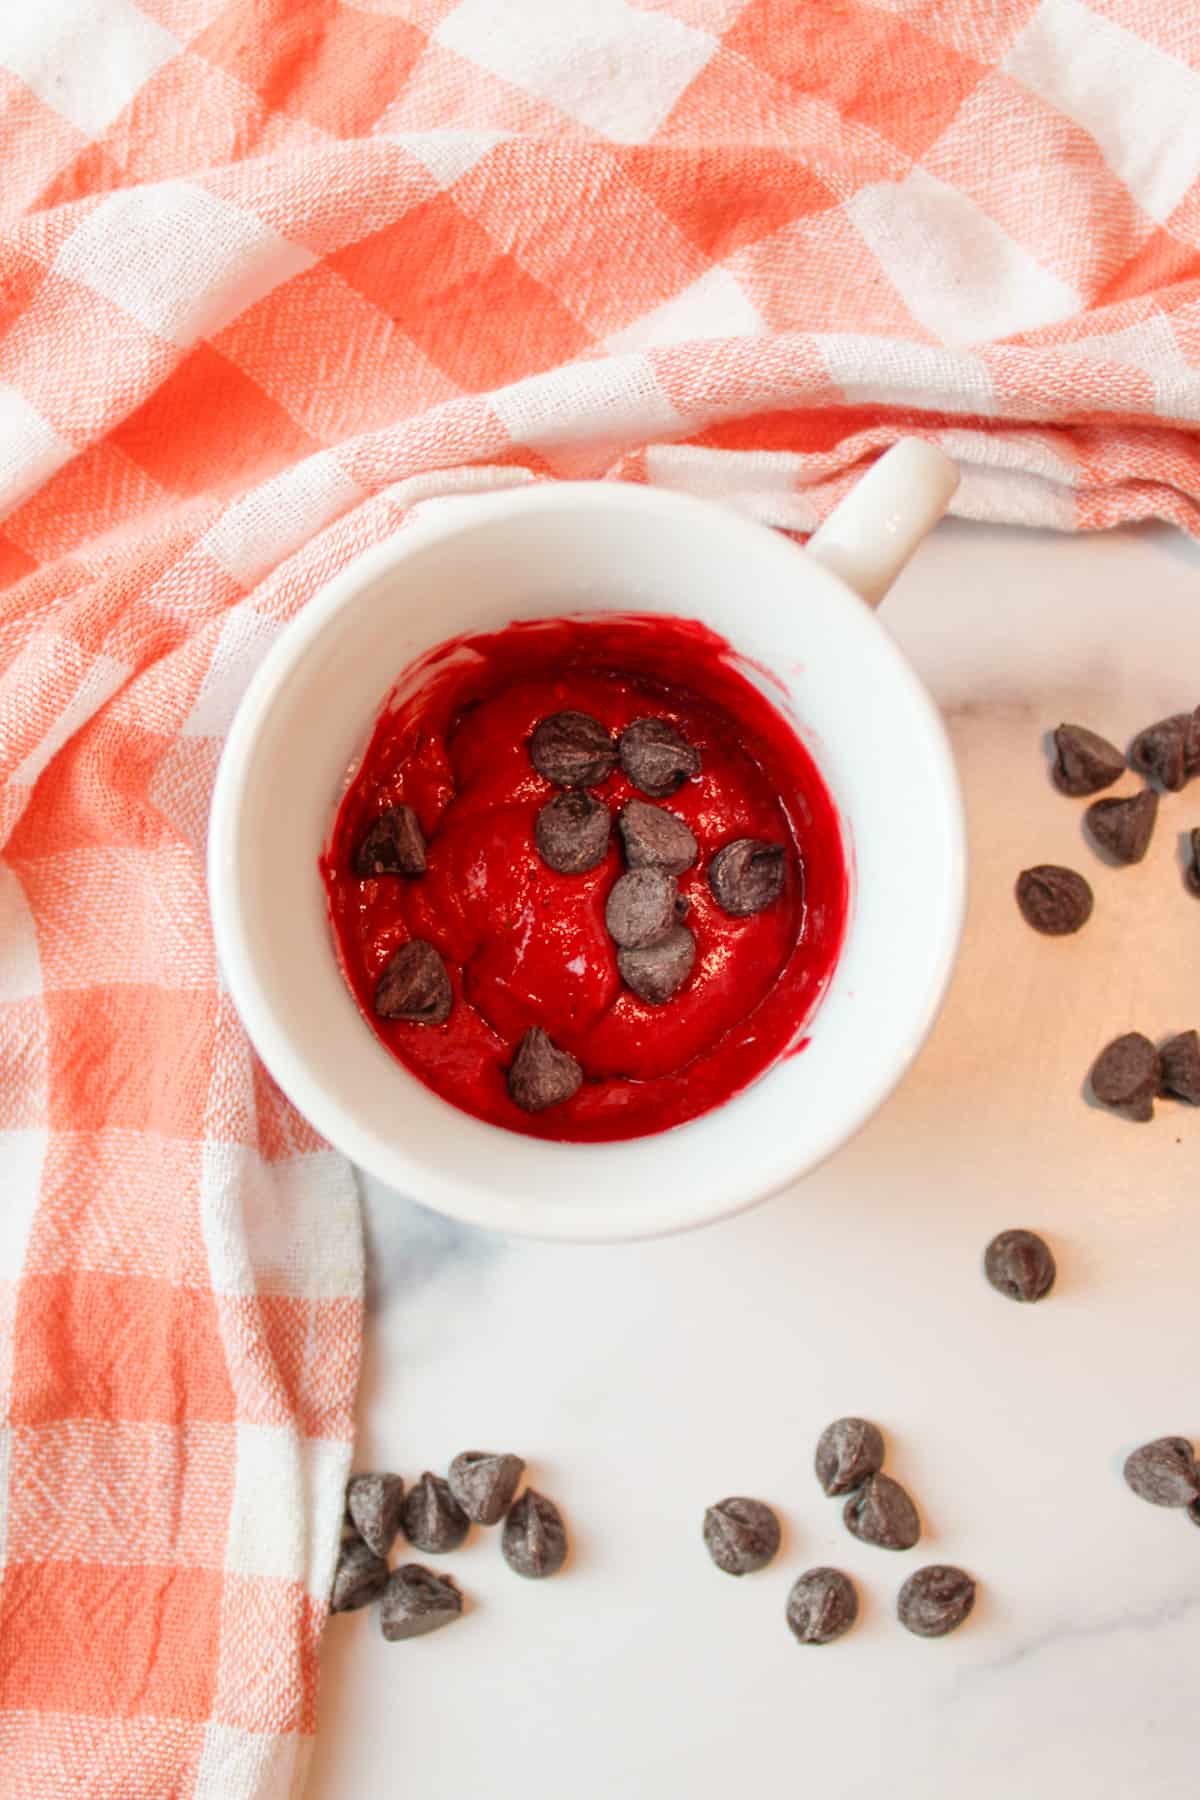 red velvet cake batter in a mug with chocolate chips inside and around the mug